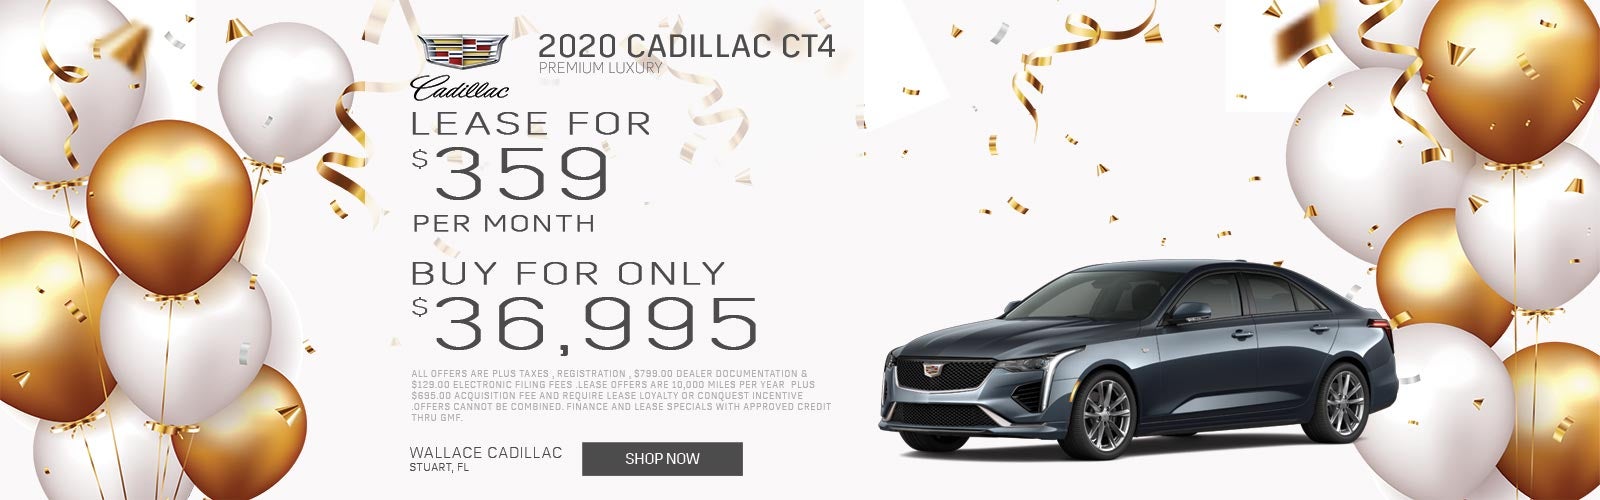 2020 Cadillac CT4 Special Offer